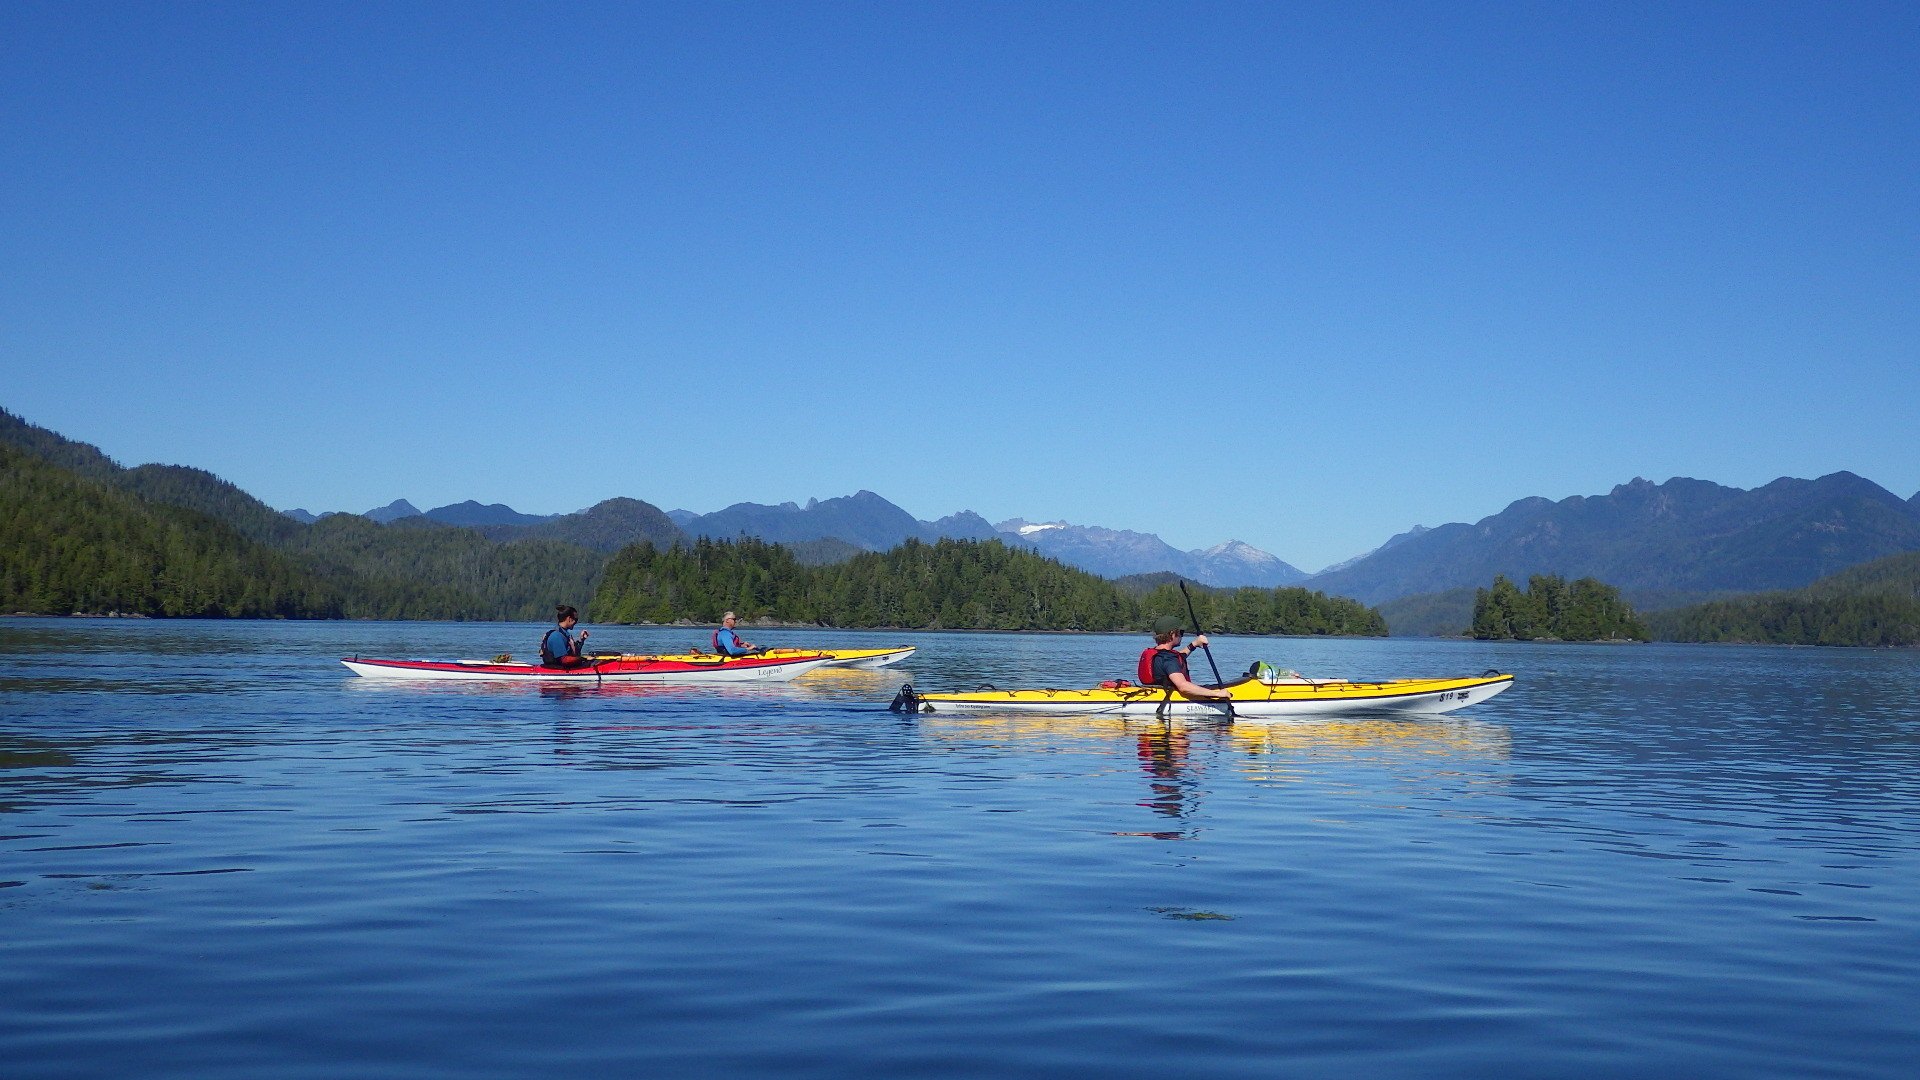 Ben and other travellers kayaking to Meares Island Vancouver Island Canada